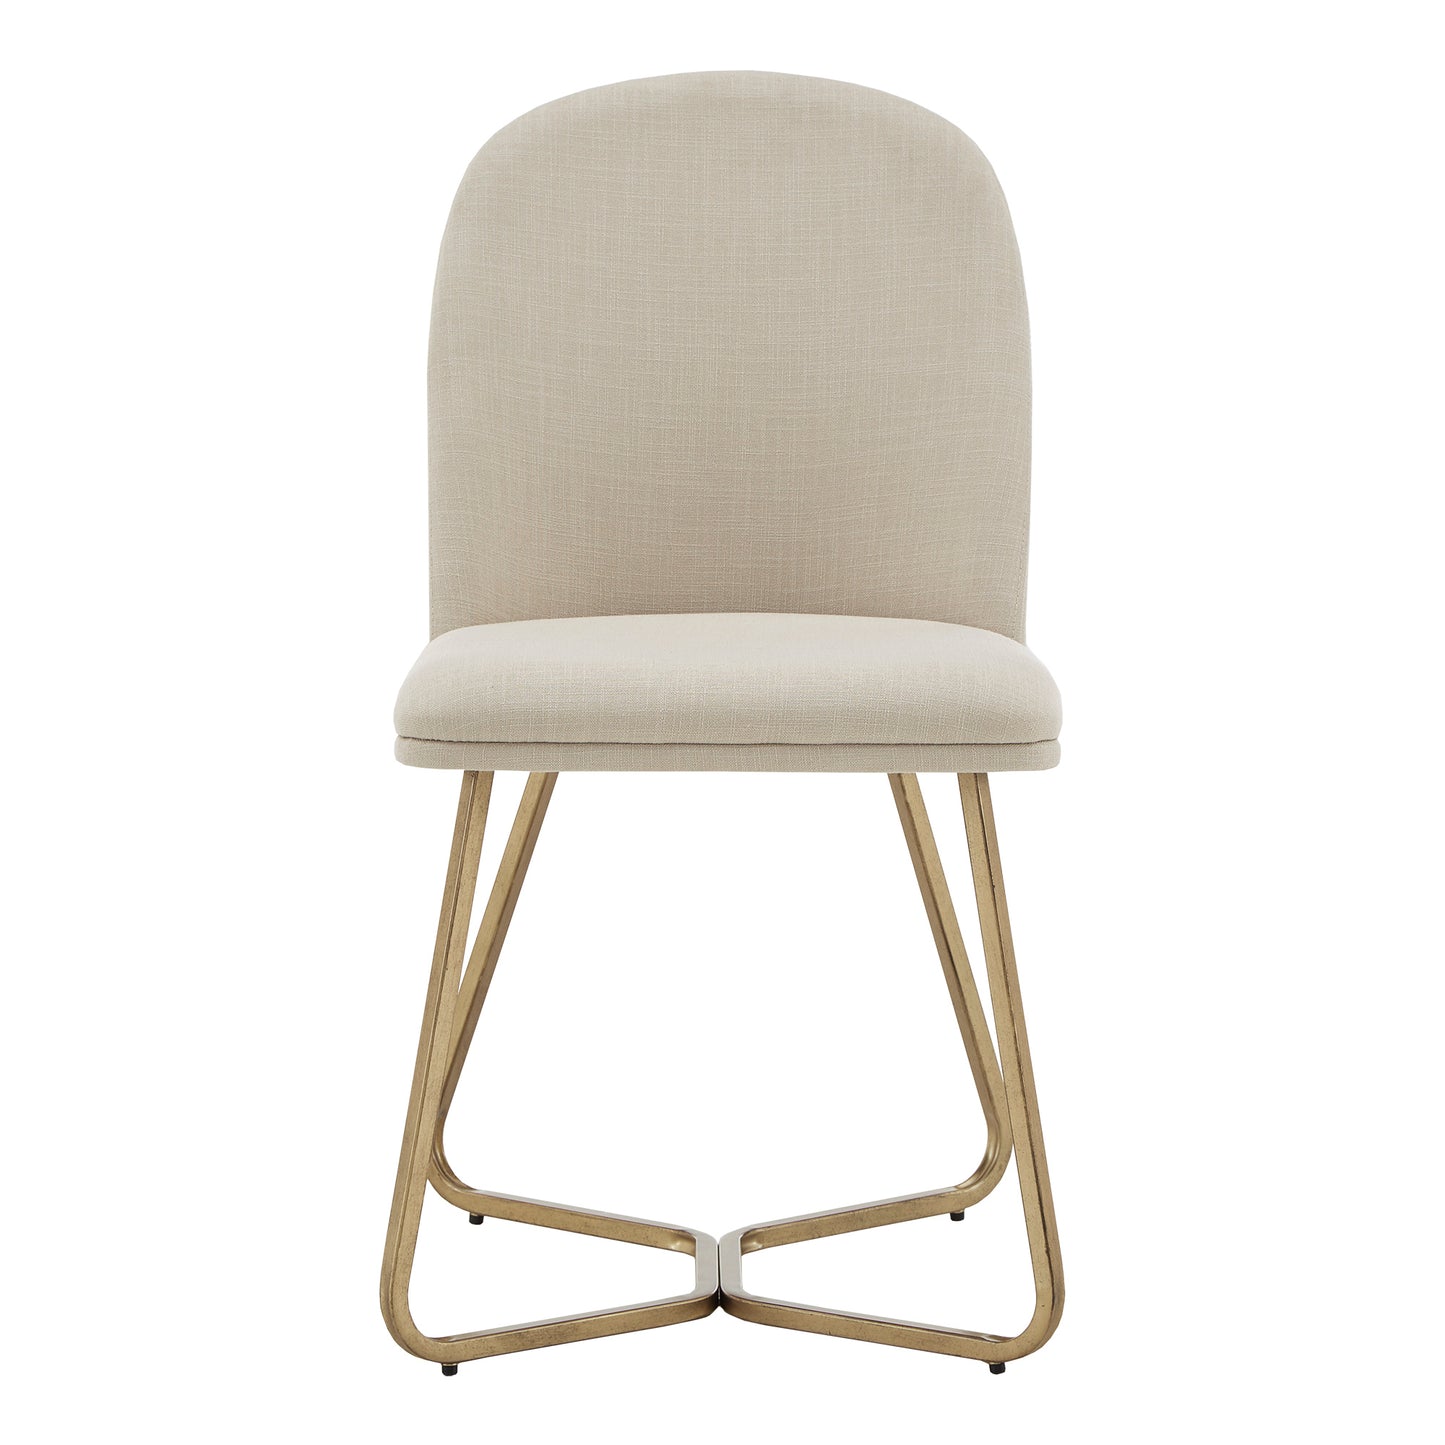 Linen Upholstered Dining Chairs (Set of 2) - Beige